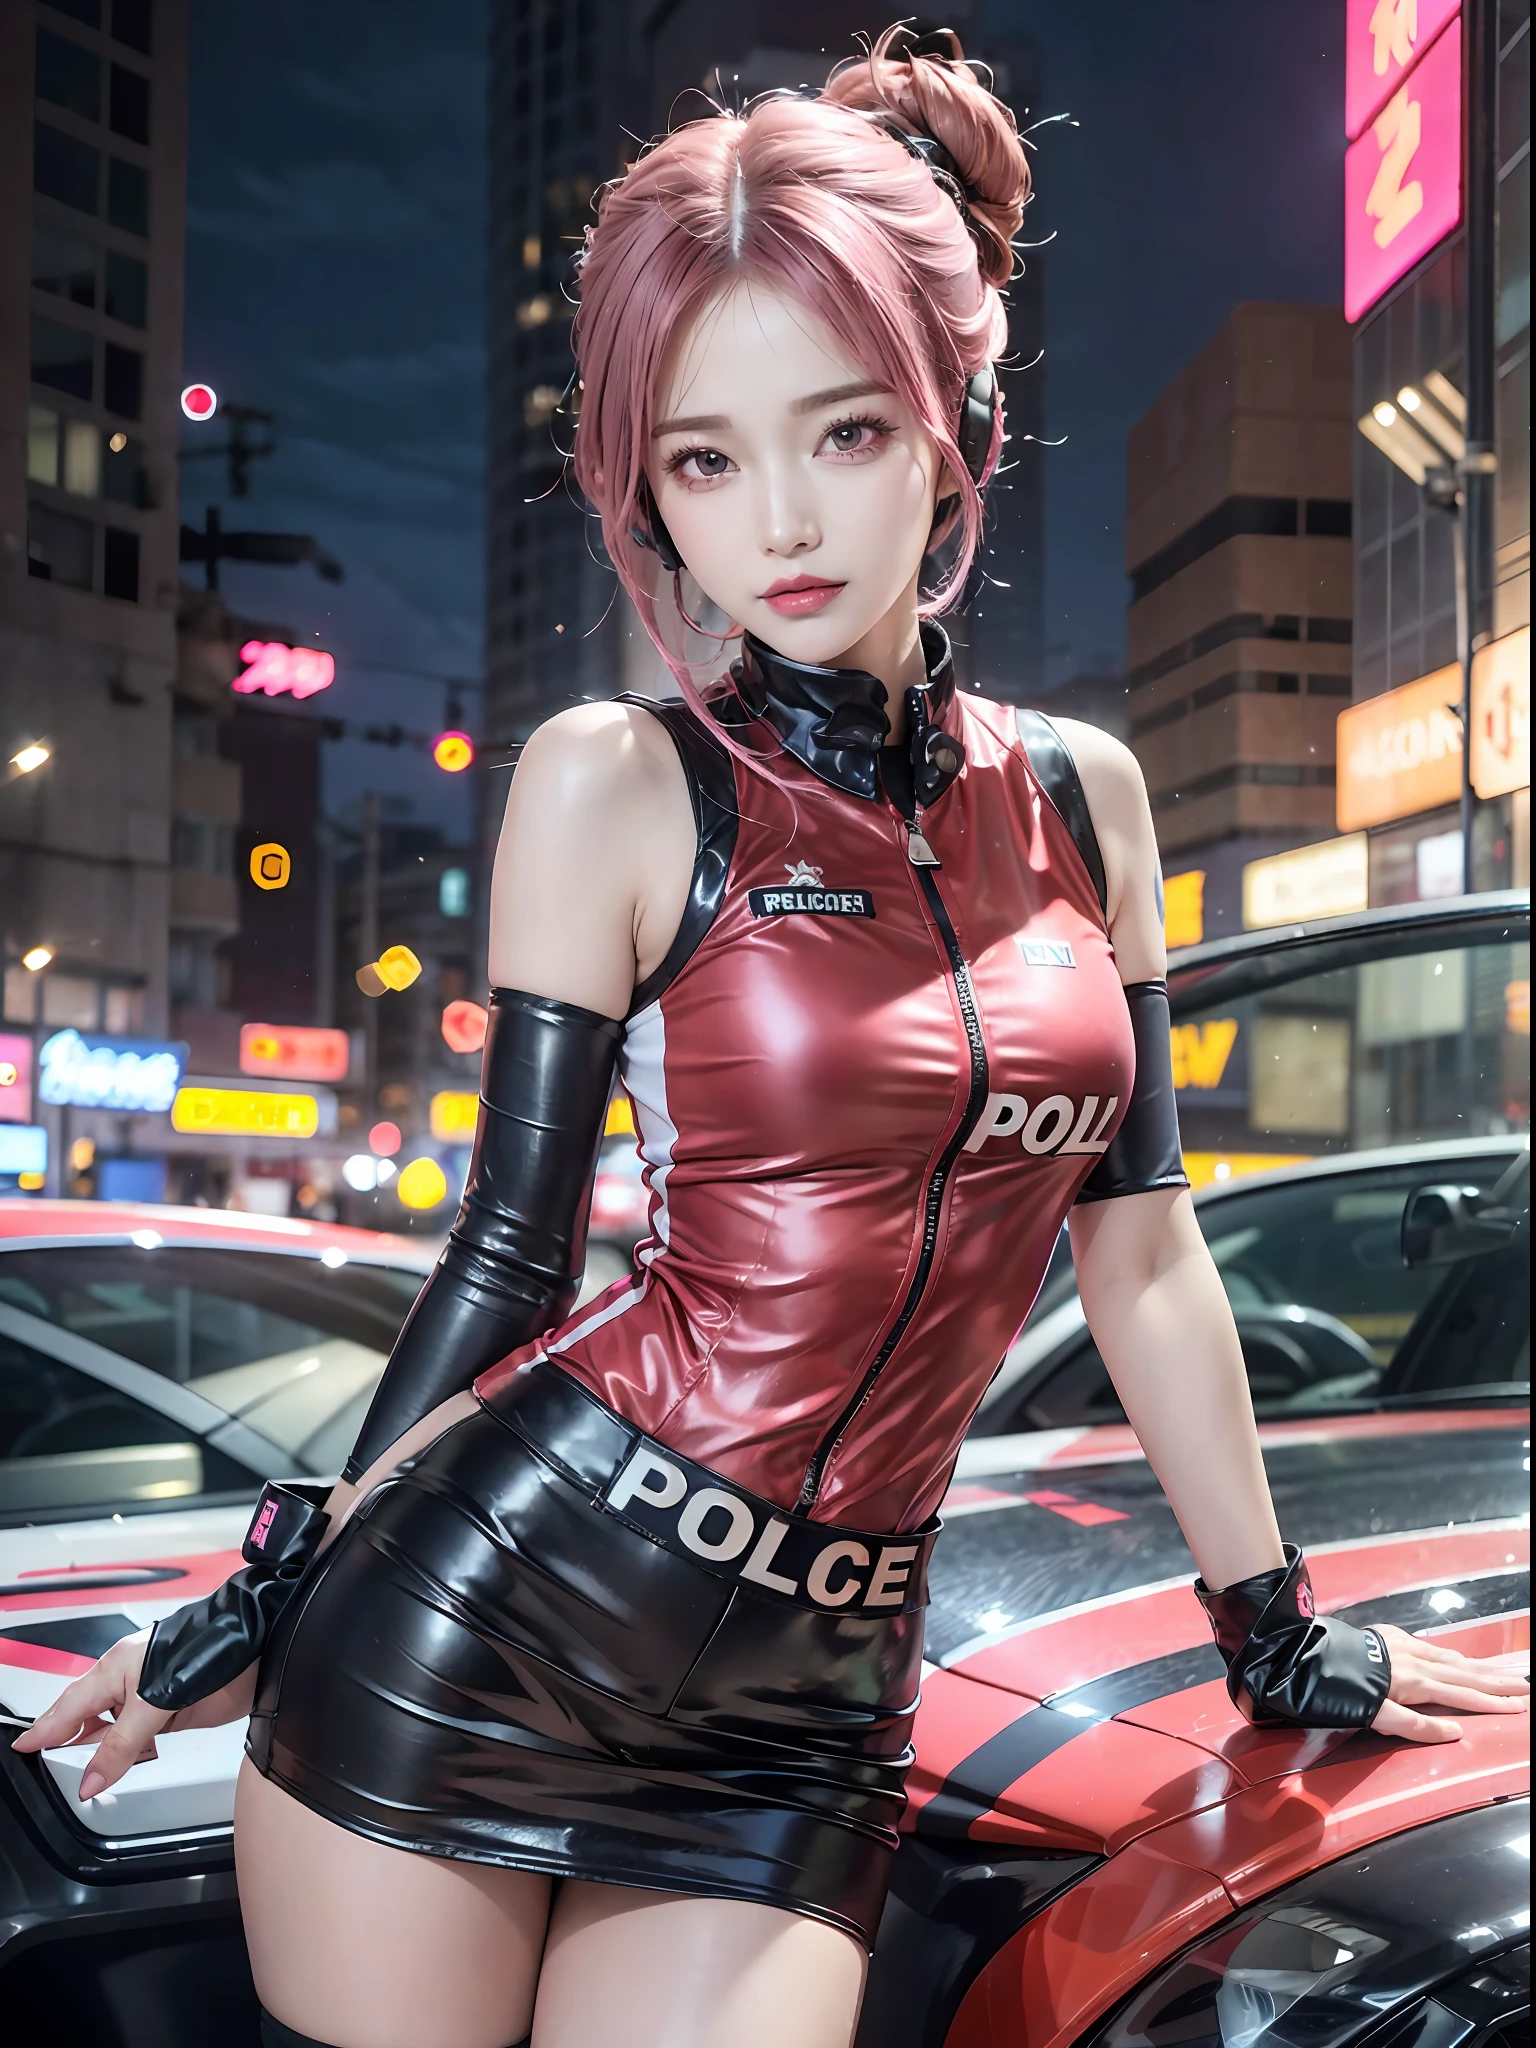 Top Quality, Ultra High Definition, (Photorealistic: 1.4), (Pink updo Hair: 1.3), 1 Girl, (Kpop Idol), Watch Audience, Detailed Face, Contrapposto, Smooth Skin, Perfect Anatomy, Cityscape, Professional Lighting, Futuristic Fashion, Police costume like Streetwear, Headset, High-tech Fabric, laser machinegun, Racing Suit, elbow and knee pads, racing gloves, sports police car background, pits, hot pnts, short , POLICE, pink hair,